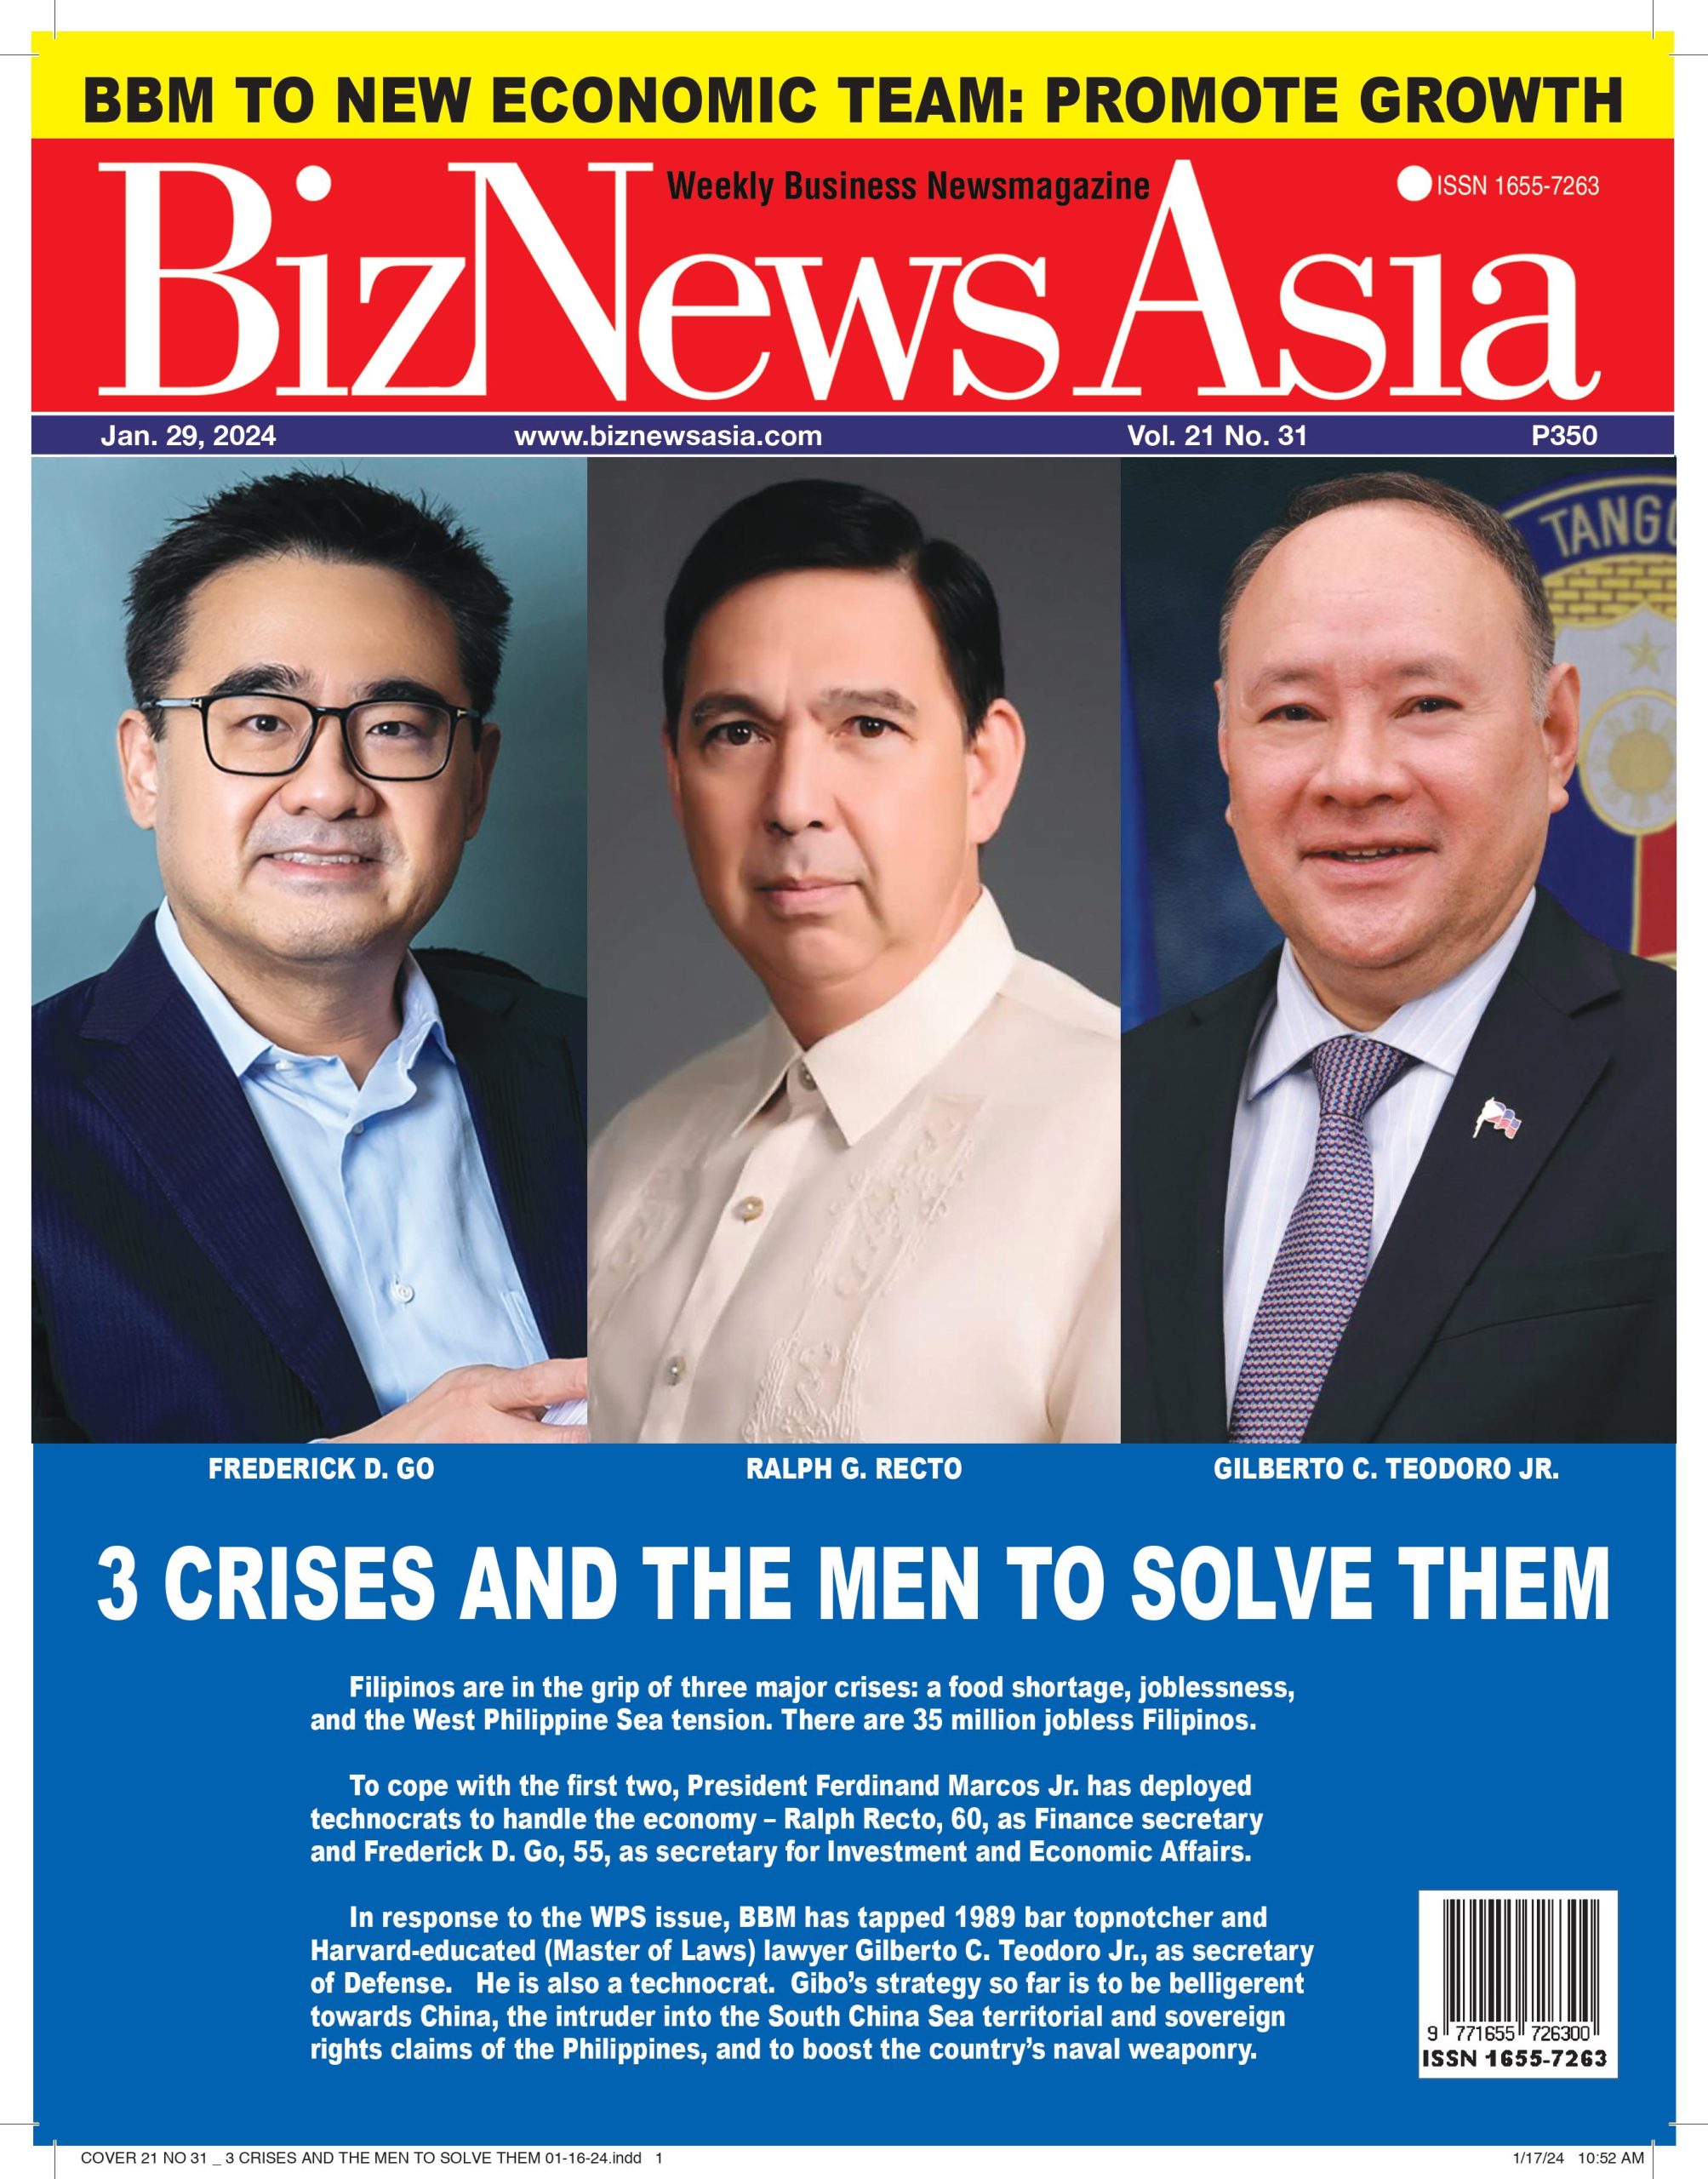 3 CRISES AND THE MEN TO SOLVE THEM